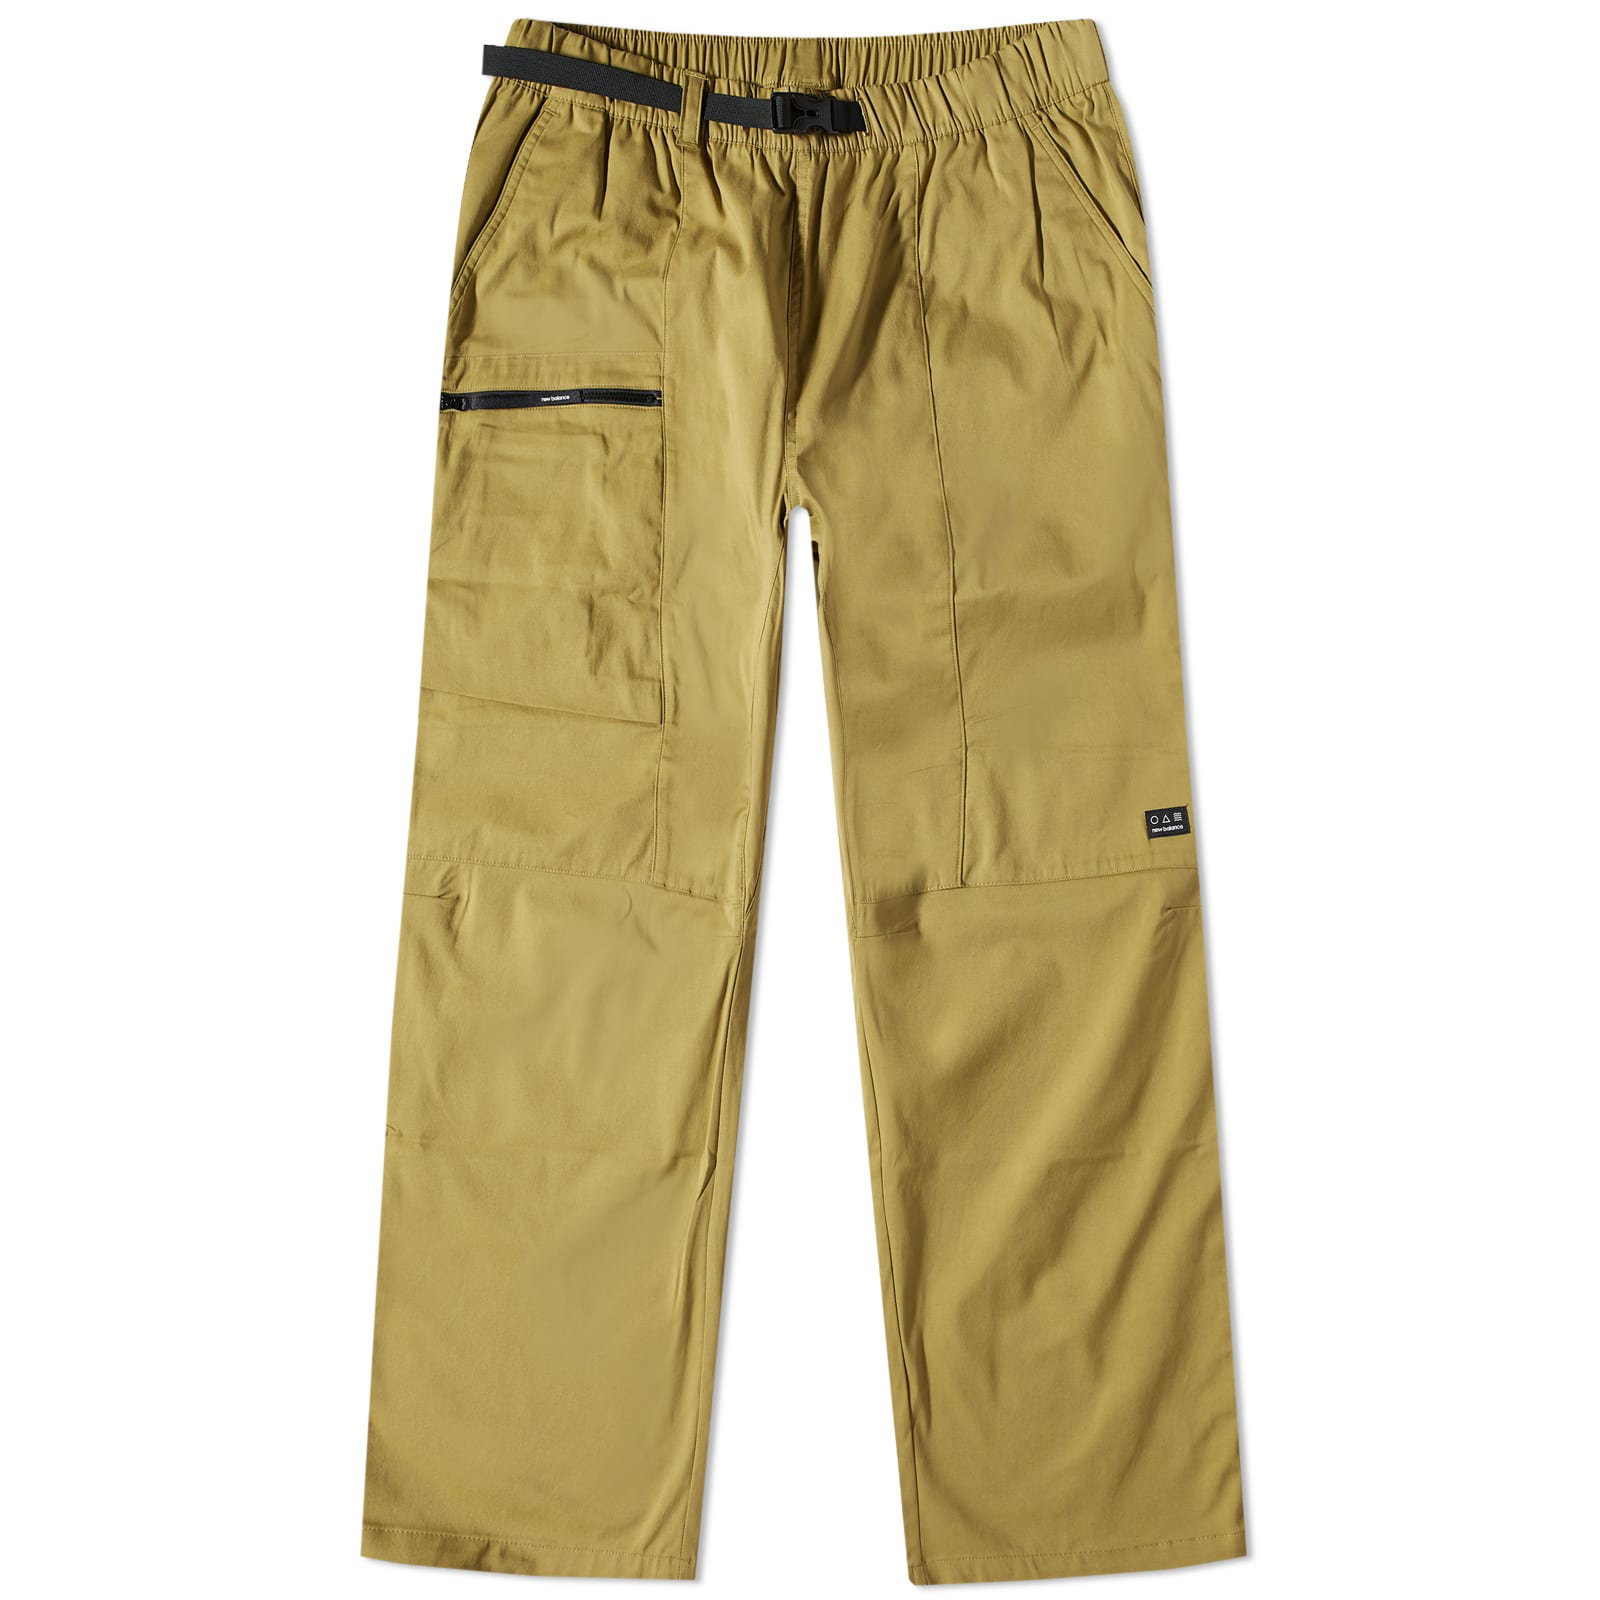 New Balance AT Woven Trousers - MP31529-OLL